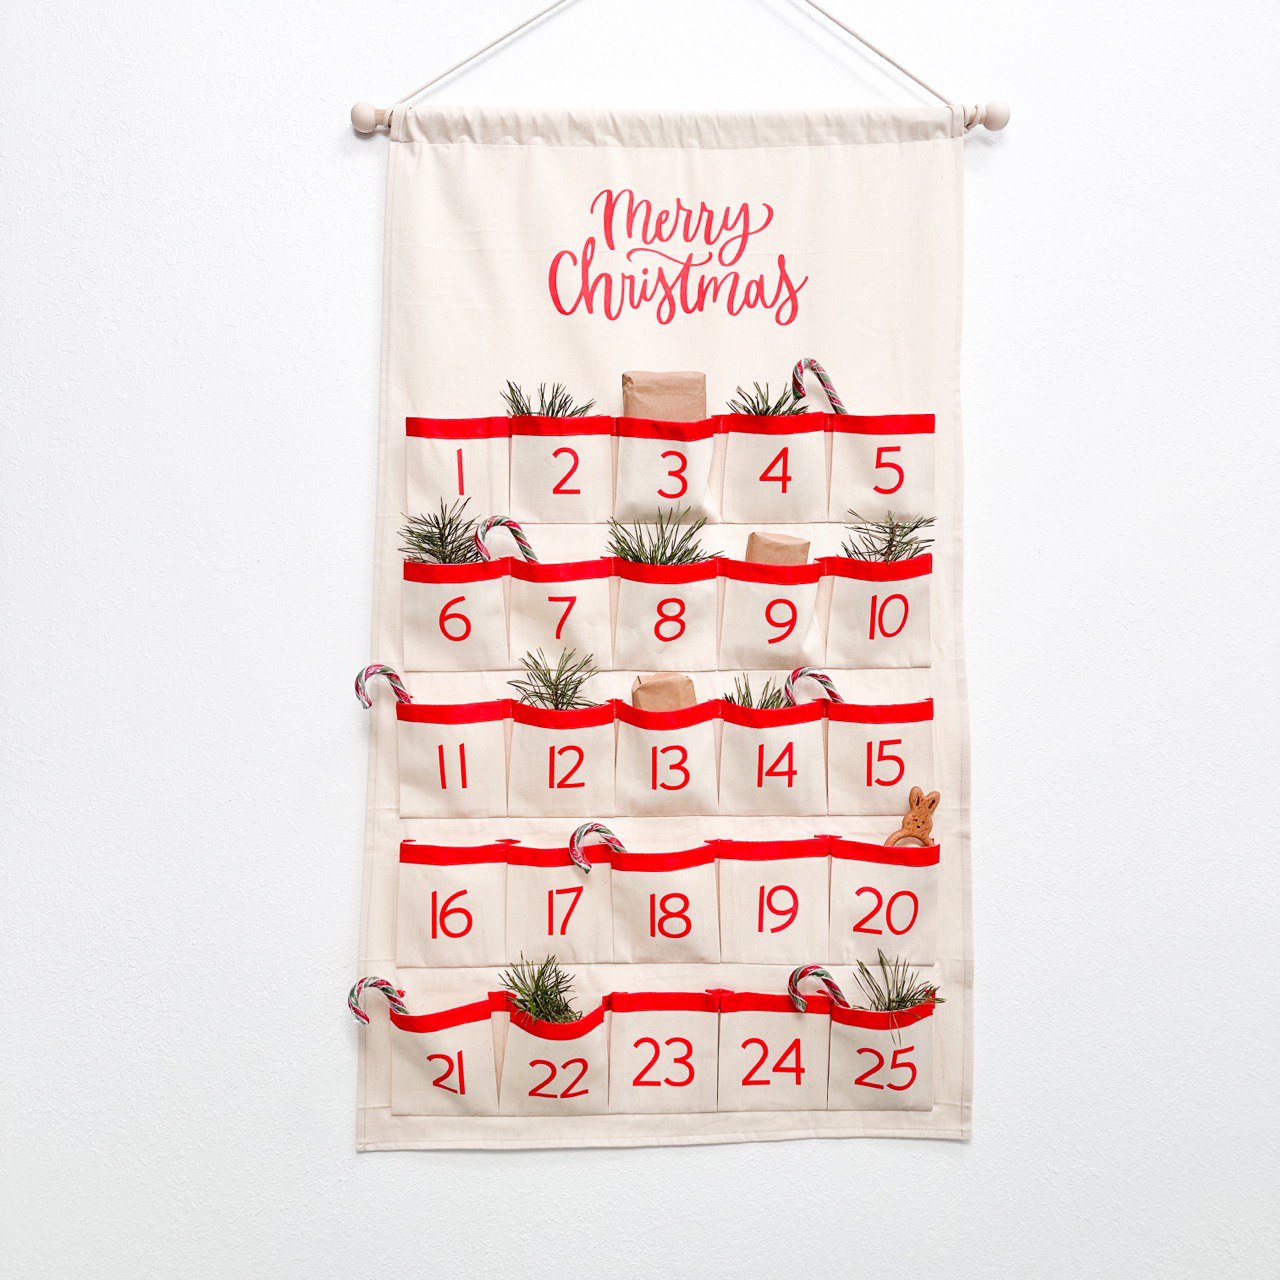 Christmas Advent Calendars for kids and teens - A beautifully crafted, eco-friendly advent calendar made from premium organic canvas, bringing joy and surprises to your holiday season